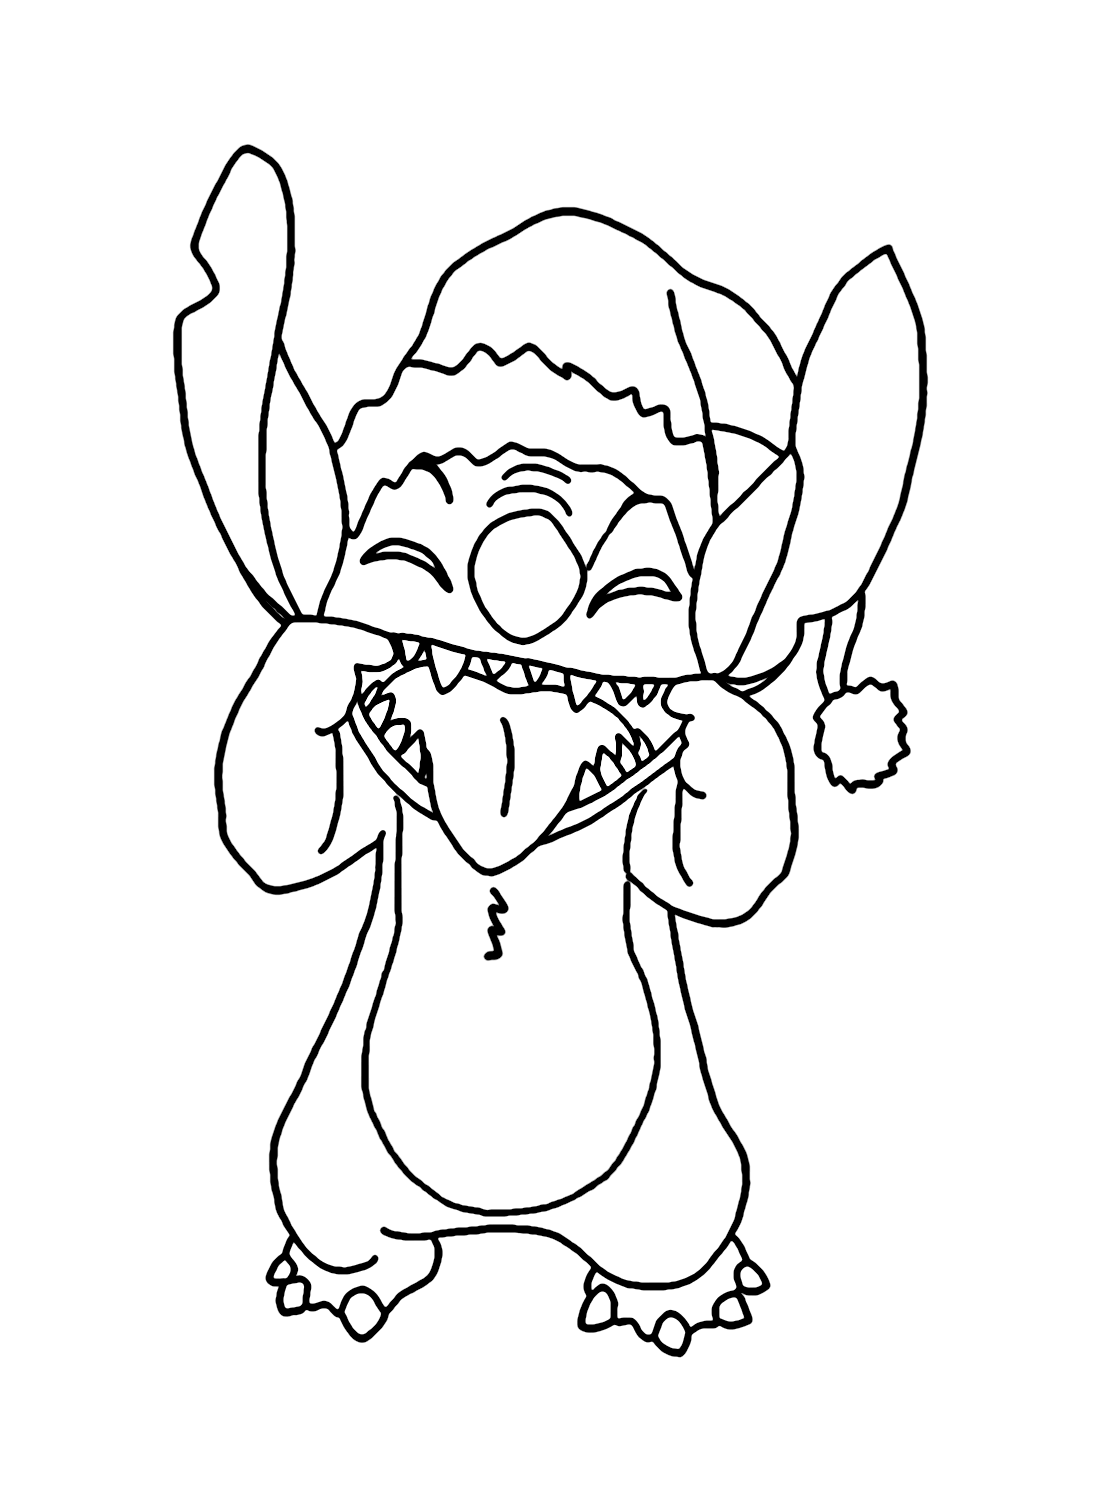 Stitch Christmas Coloring Pages Coloring Page